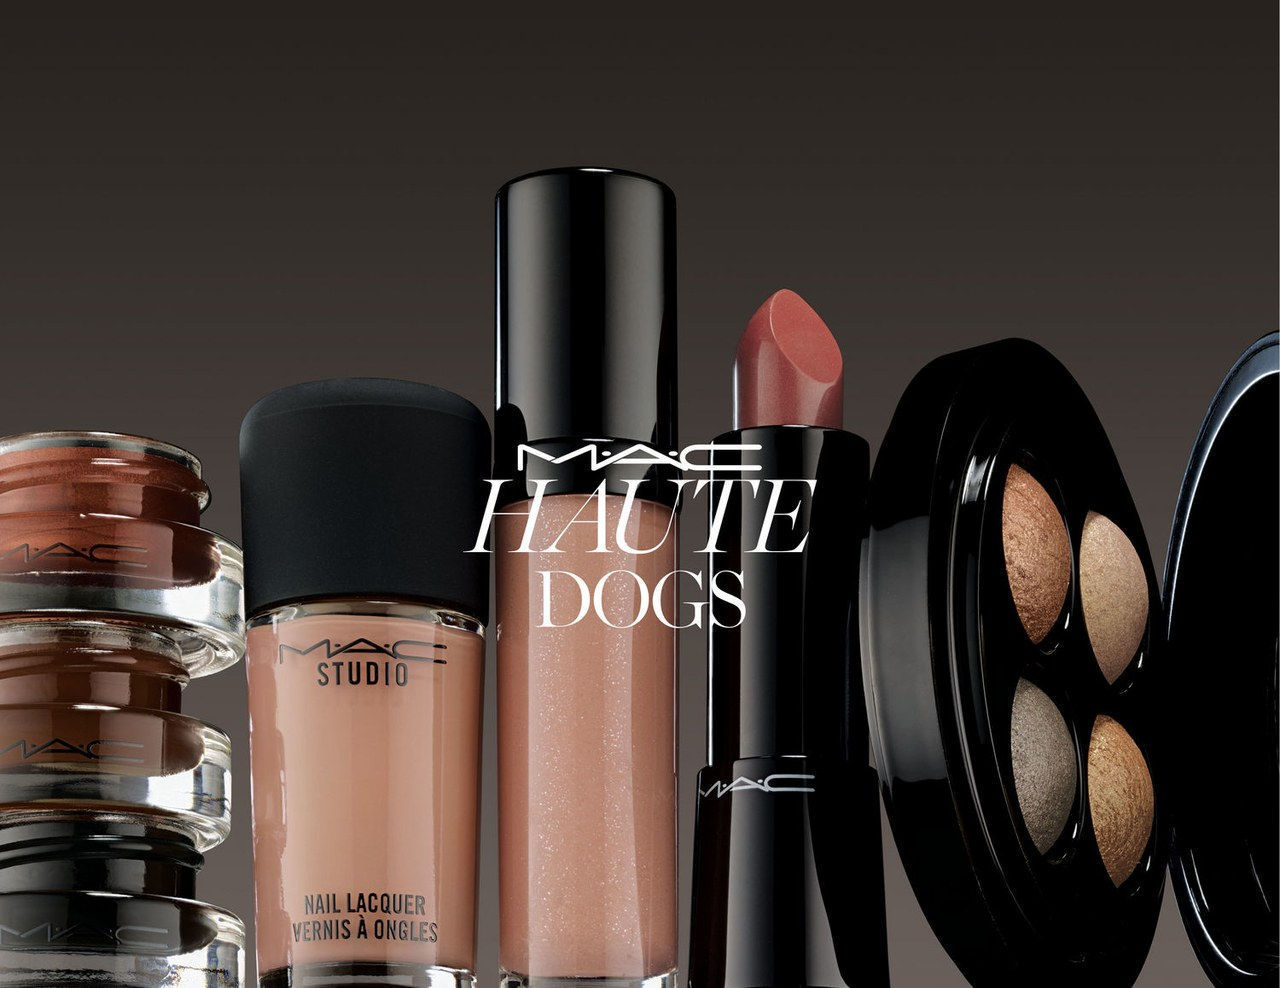 haute dogs products 2